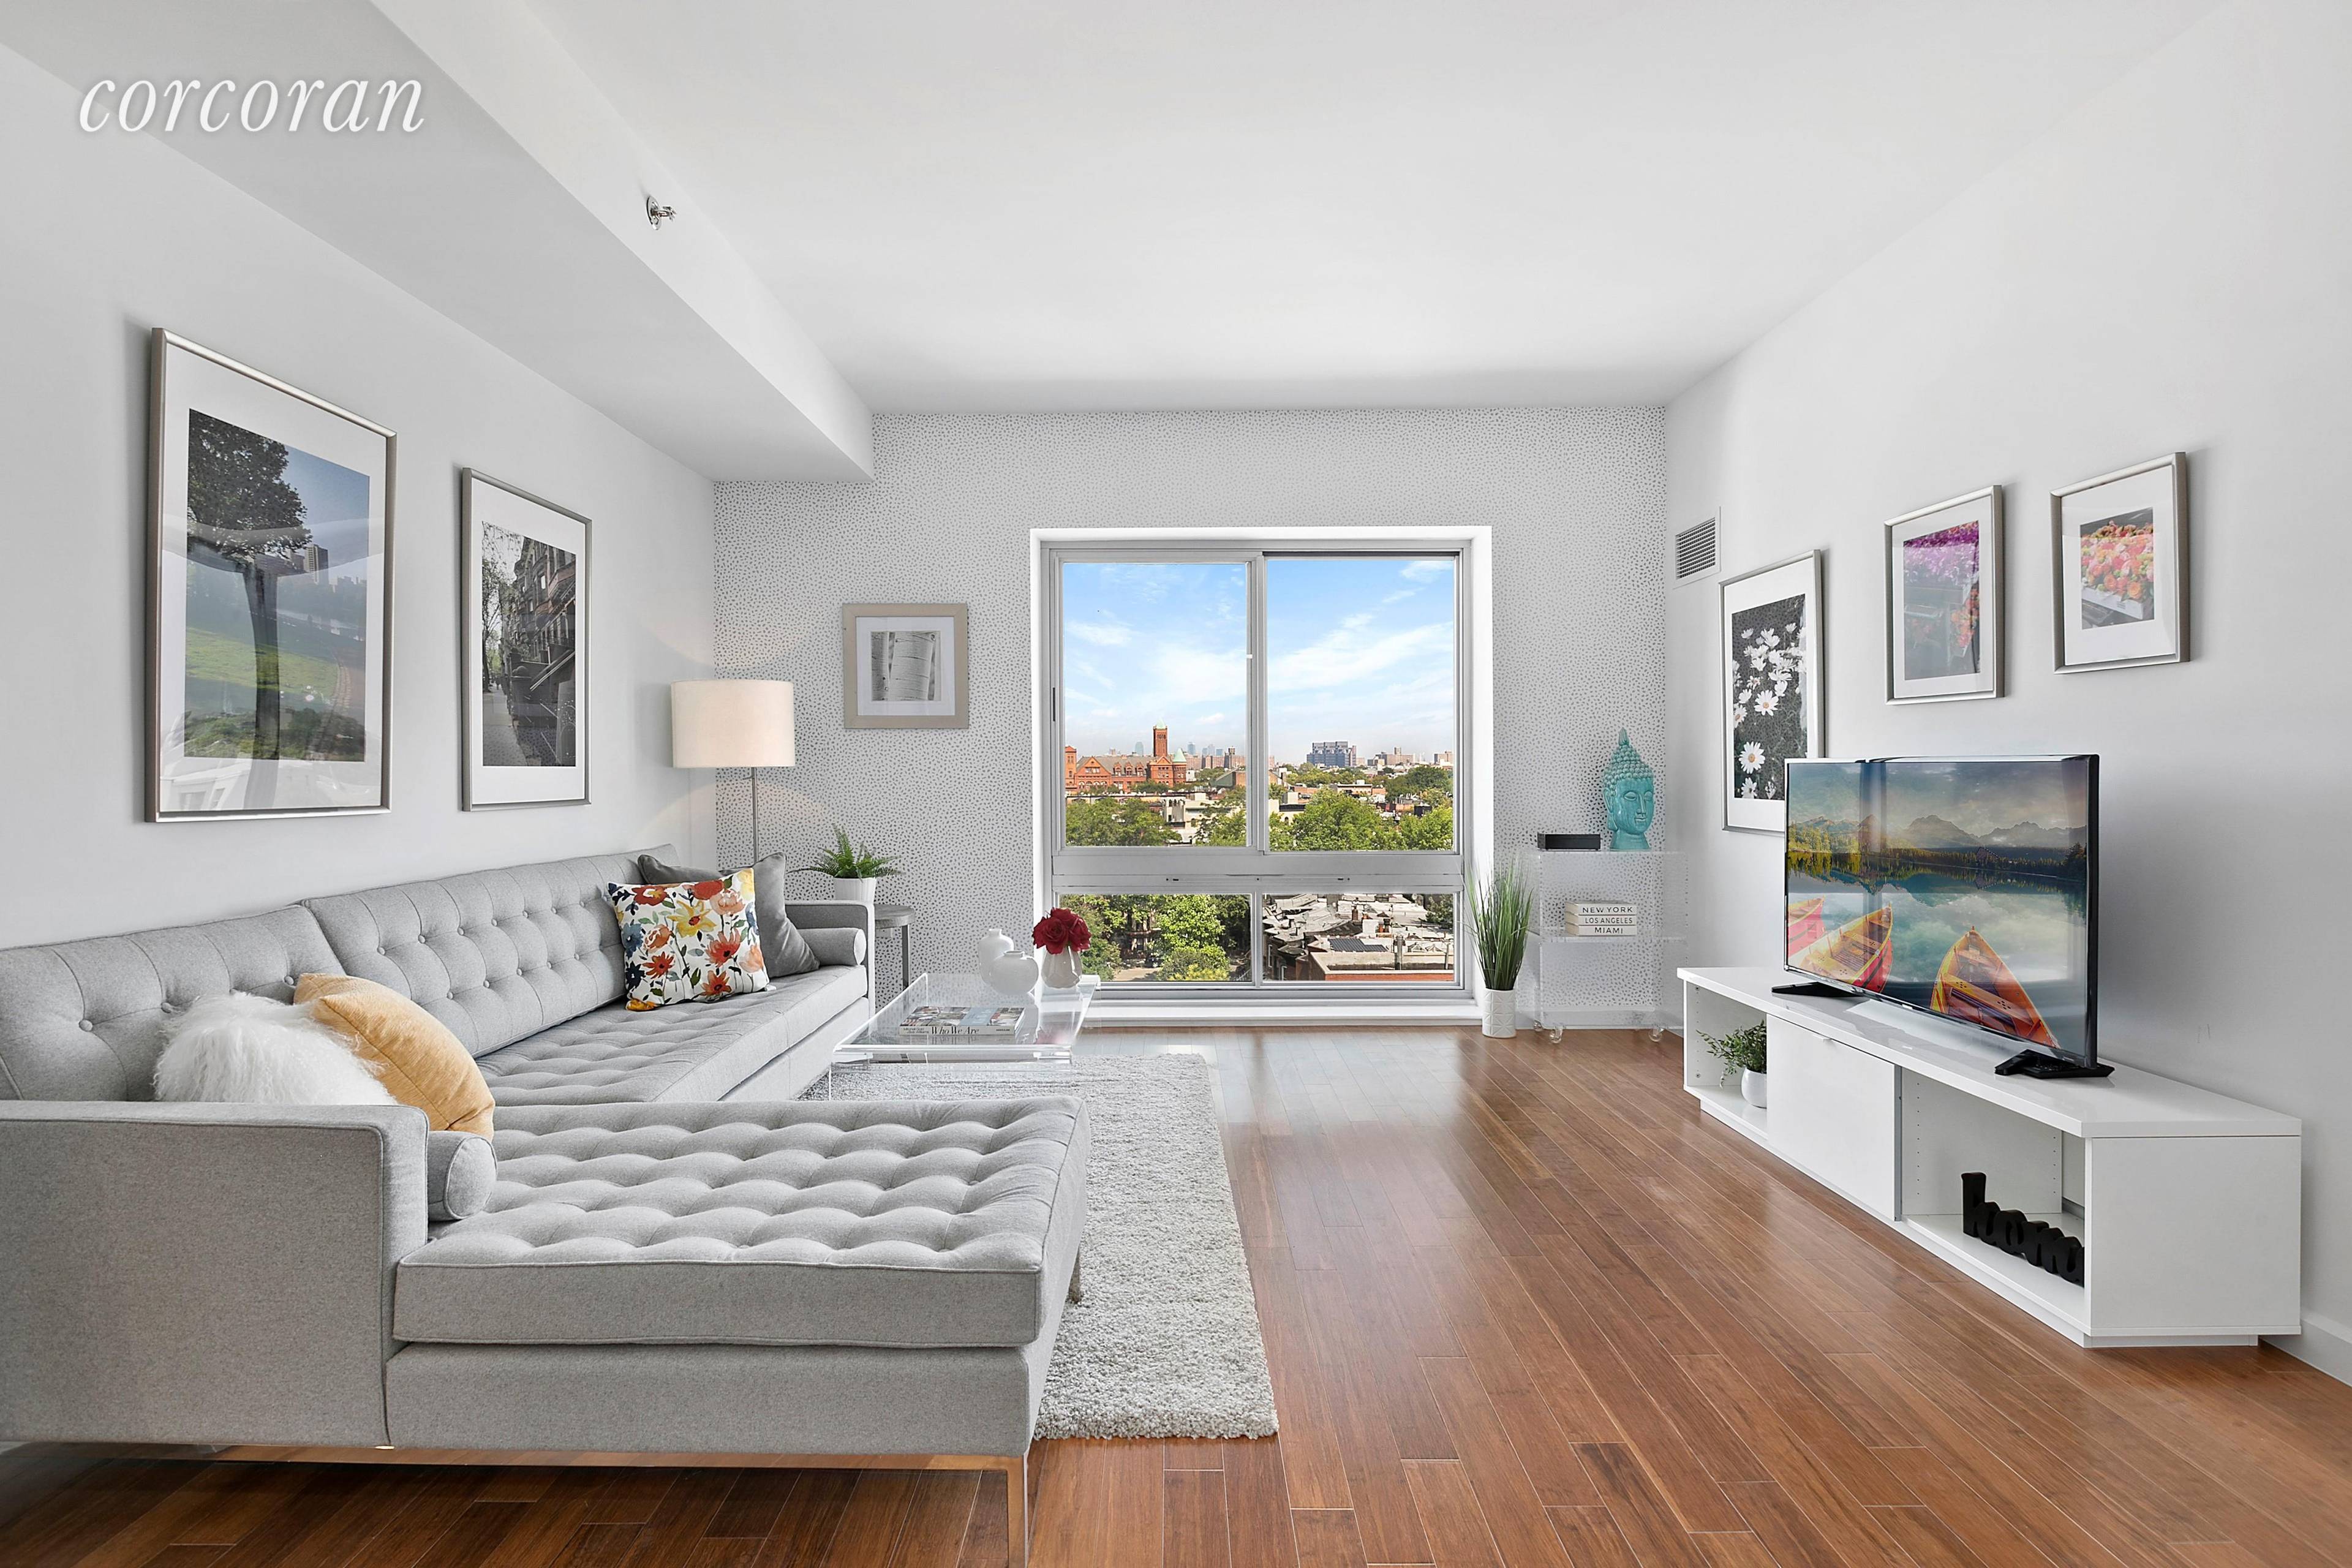 APPLICATION PENDING OPEN HOUSE BY APPT ONLY 1328 Fulton Street offers 1BRs that range from 582 821 SF providing the right amount of space for living and entertaining and a ...